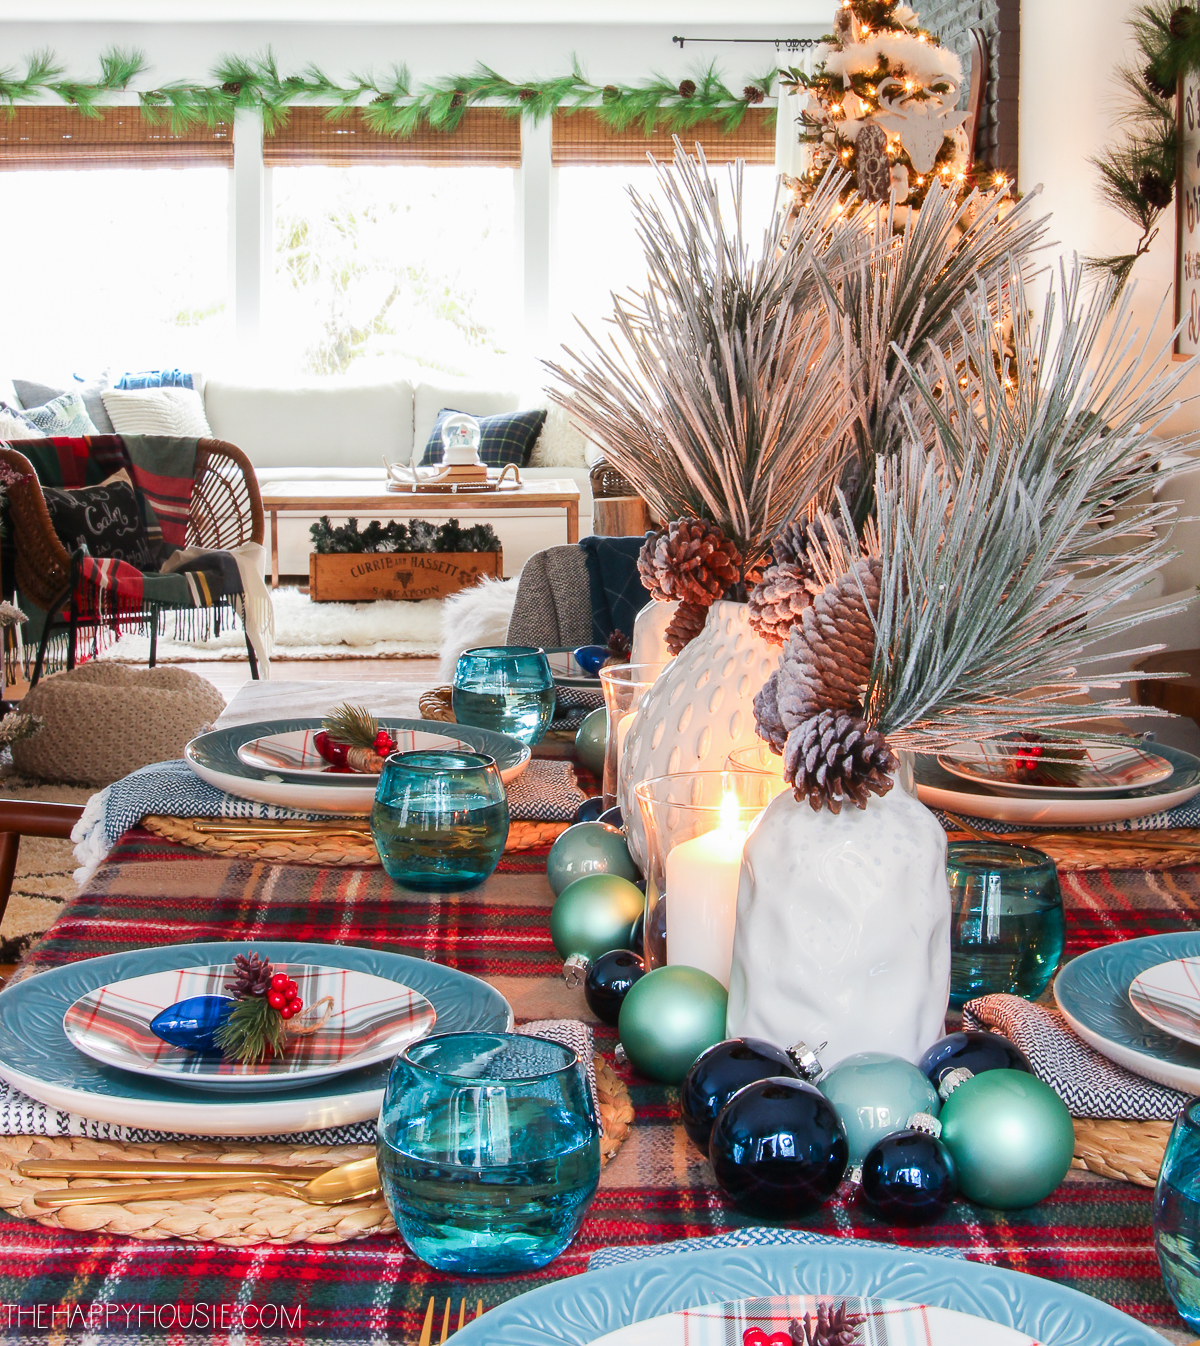 A table set for Christmas with a plaid tablecloth, and plates.